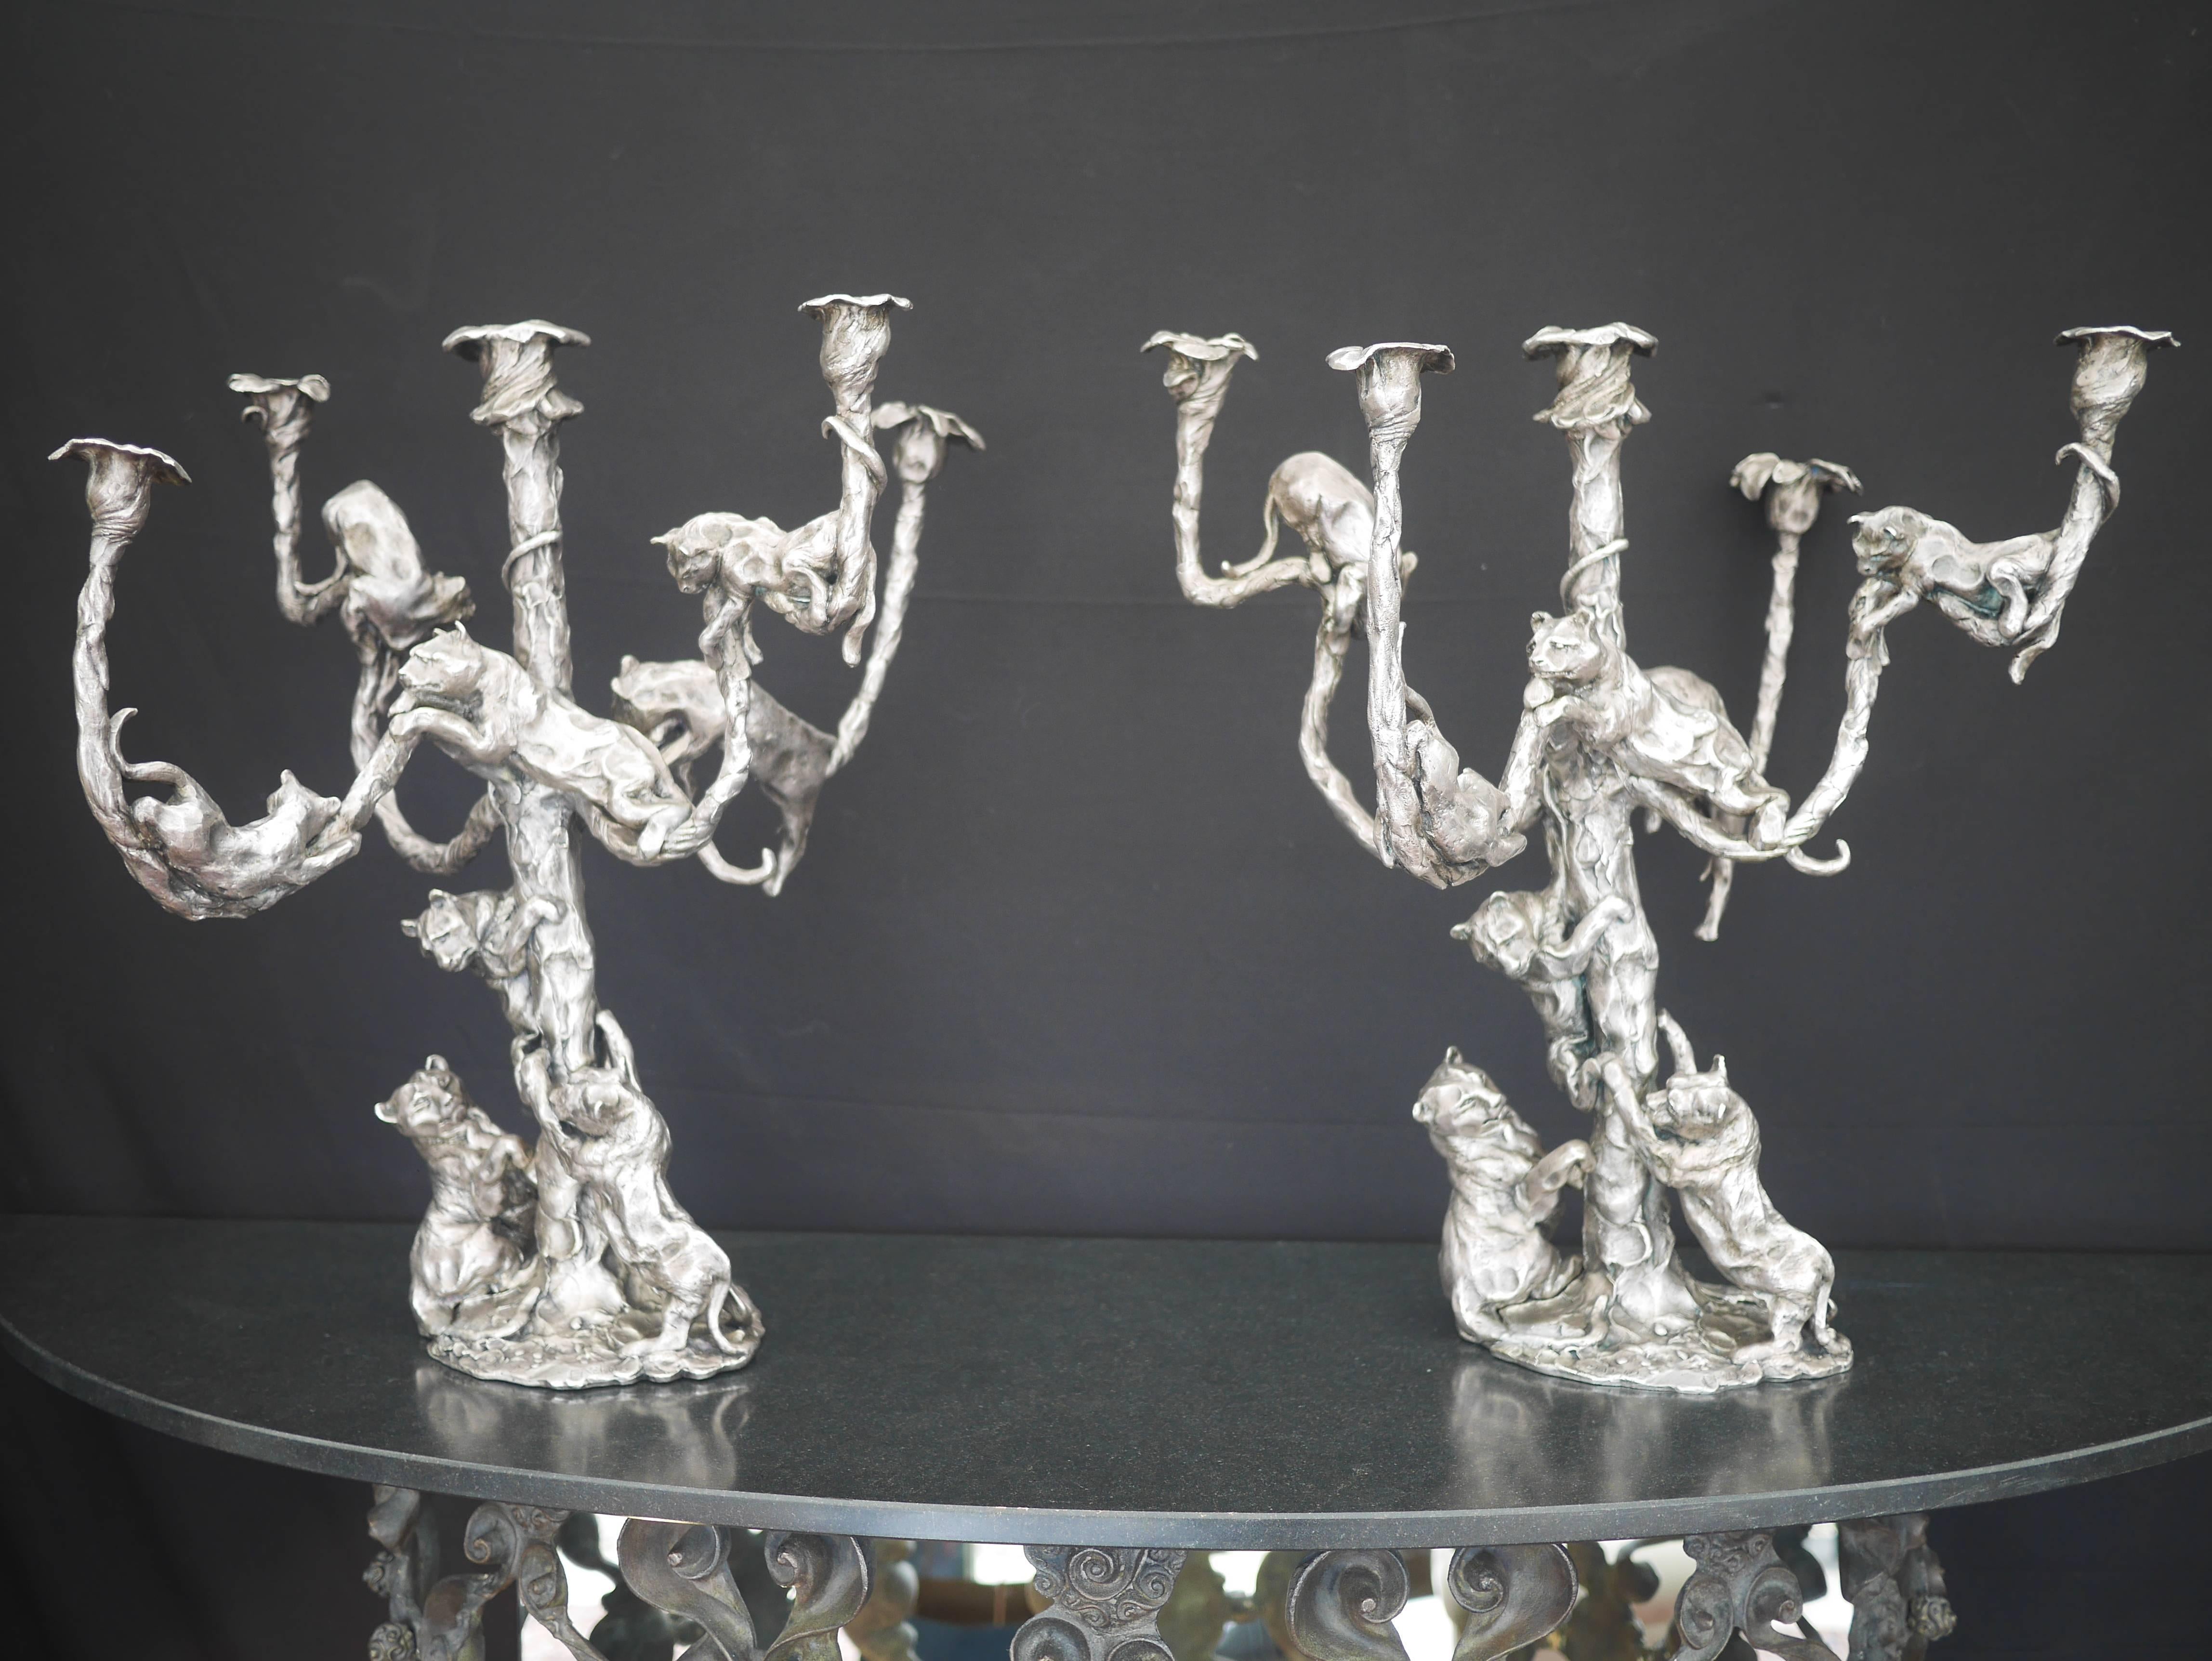 José-Maria David (1944-2015)

Pair of large candelabra with panthers with five arms of lights in silvered bronze, Artist's proof around 2005.
Both signed "DAVID, E.A." with trademark of Maromer bronzer.
Measure: Height 57 cm
25 kg